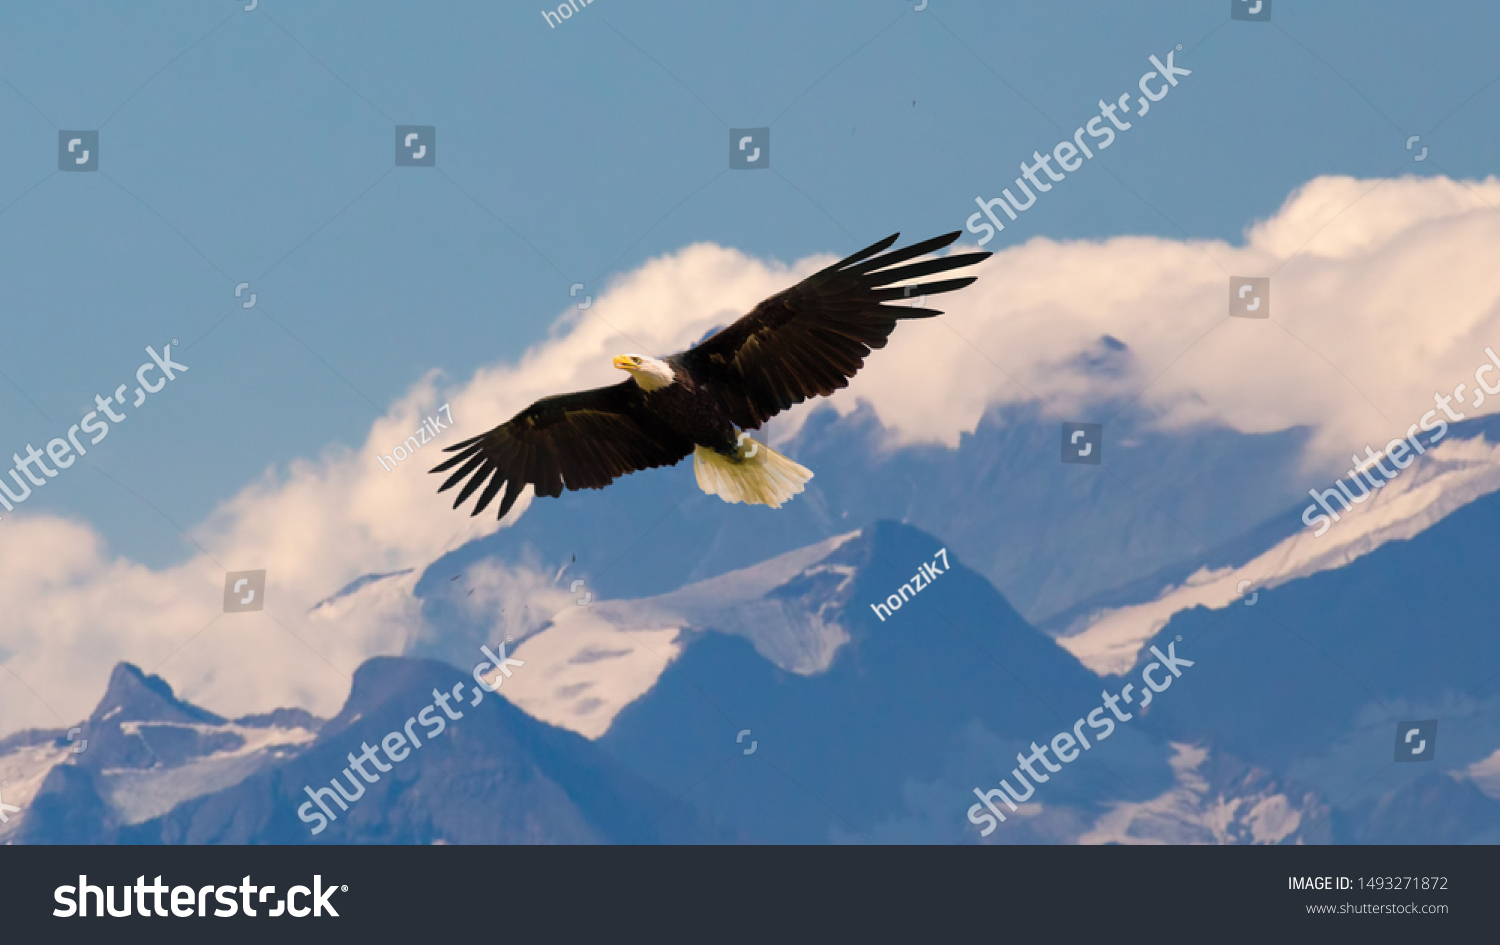 Bald eagle flying and gliding slowly and majestic on the sky over high mountains. Concept of wildlife and pure nature. #1493271872